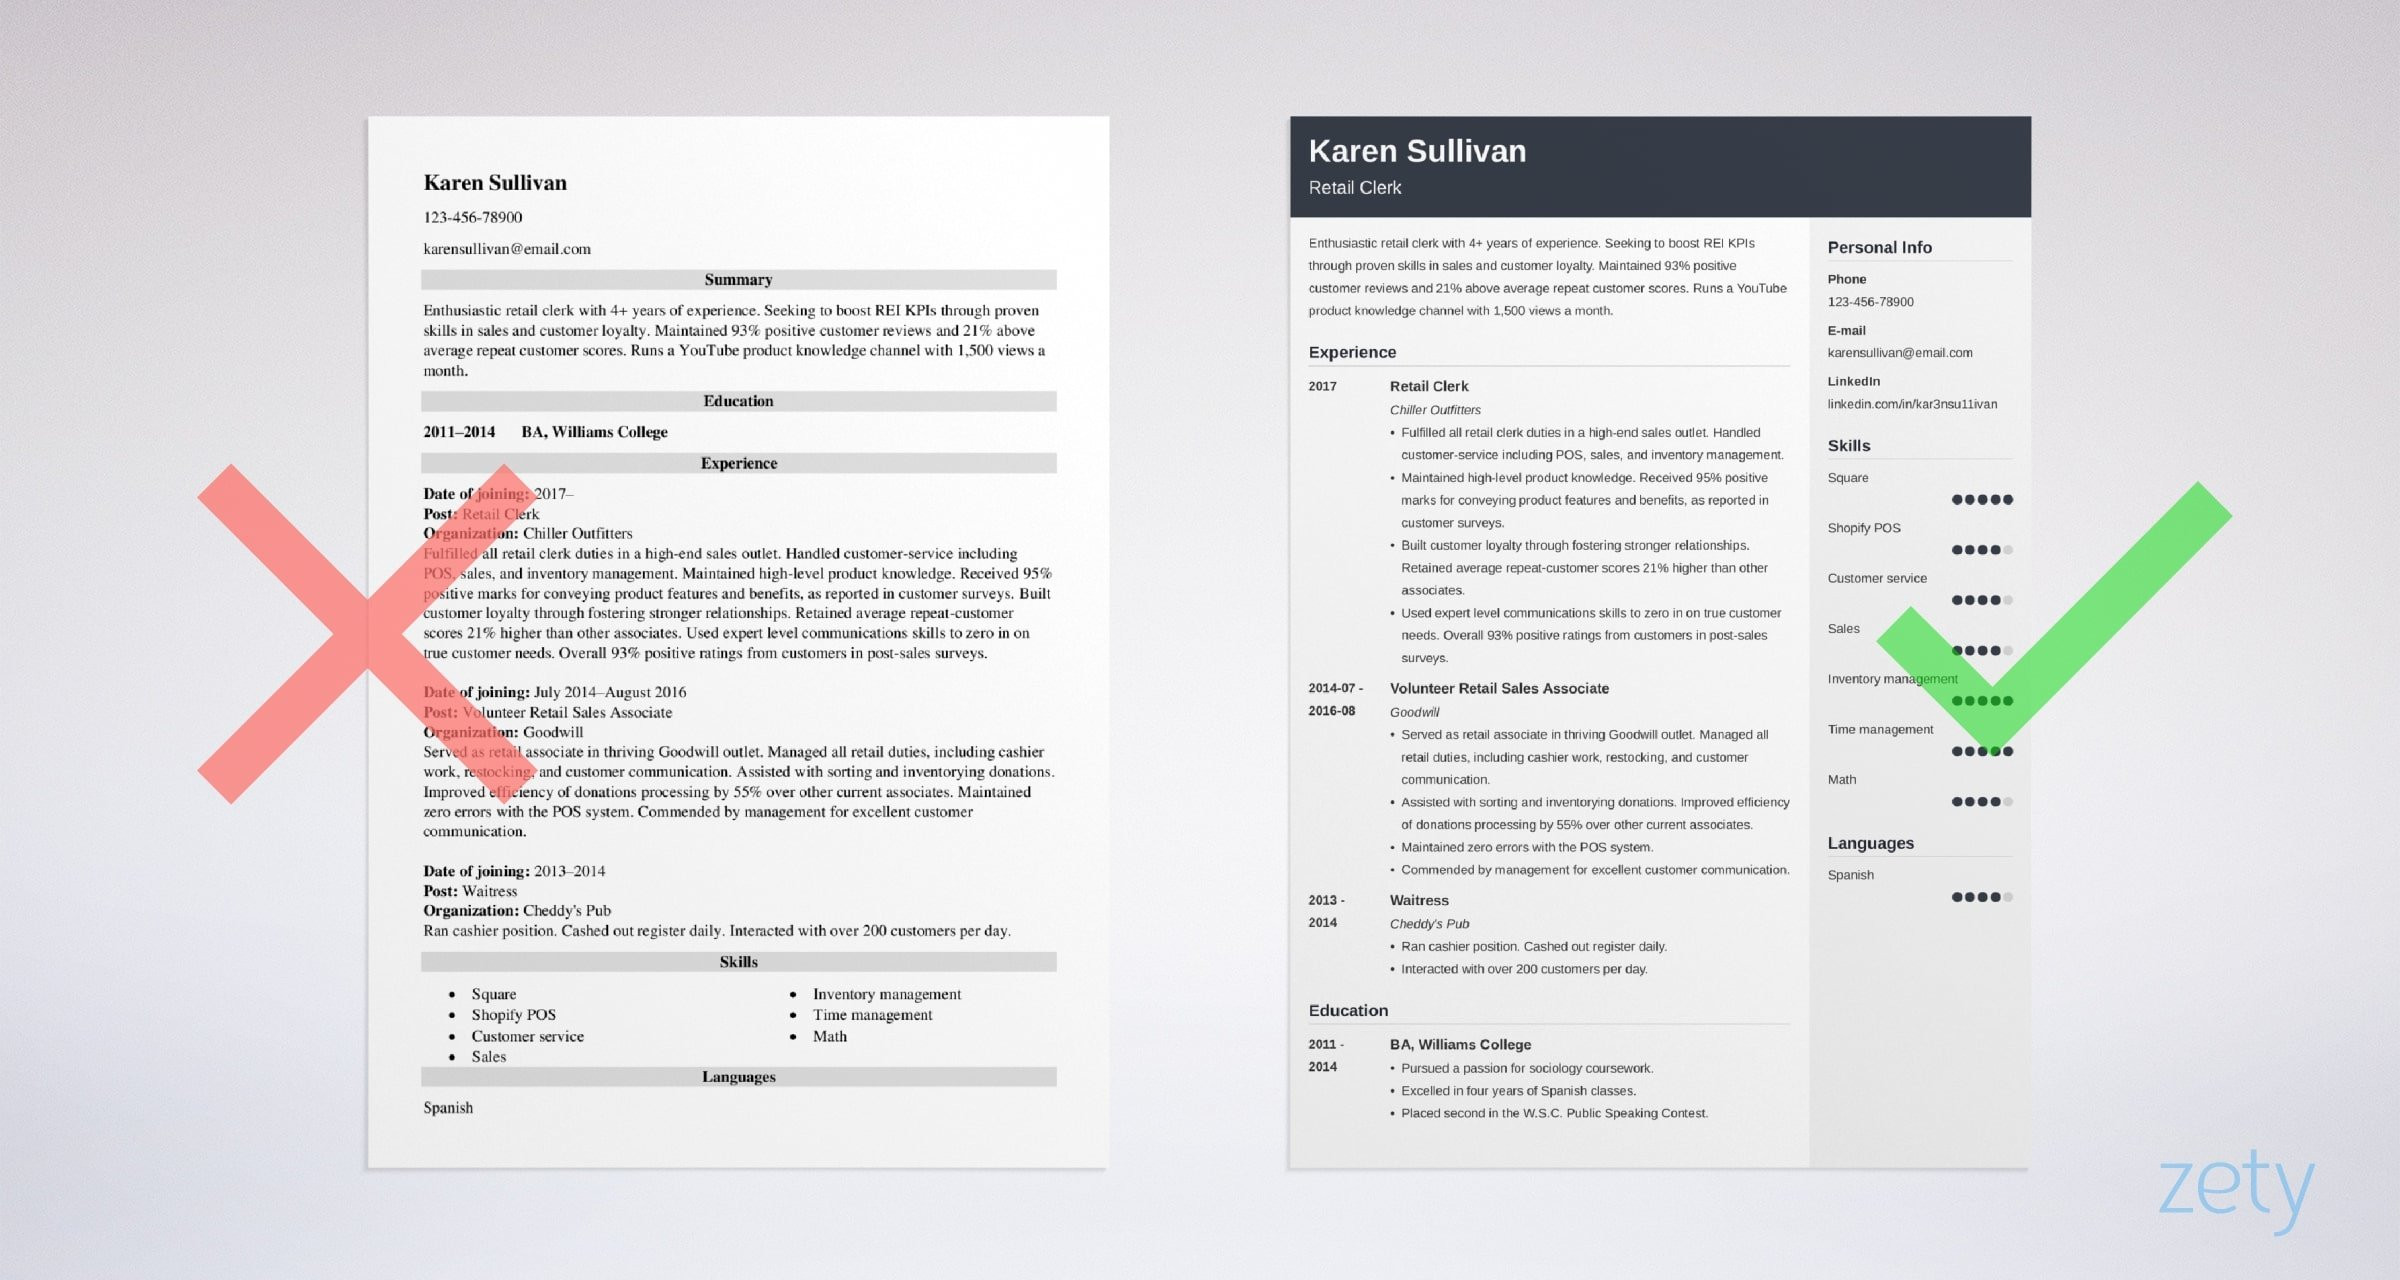 Sample Resume for Retail Management Position Retail Resume Examples (template with Skills & Experience)